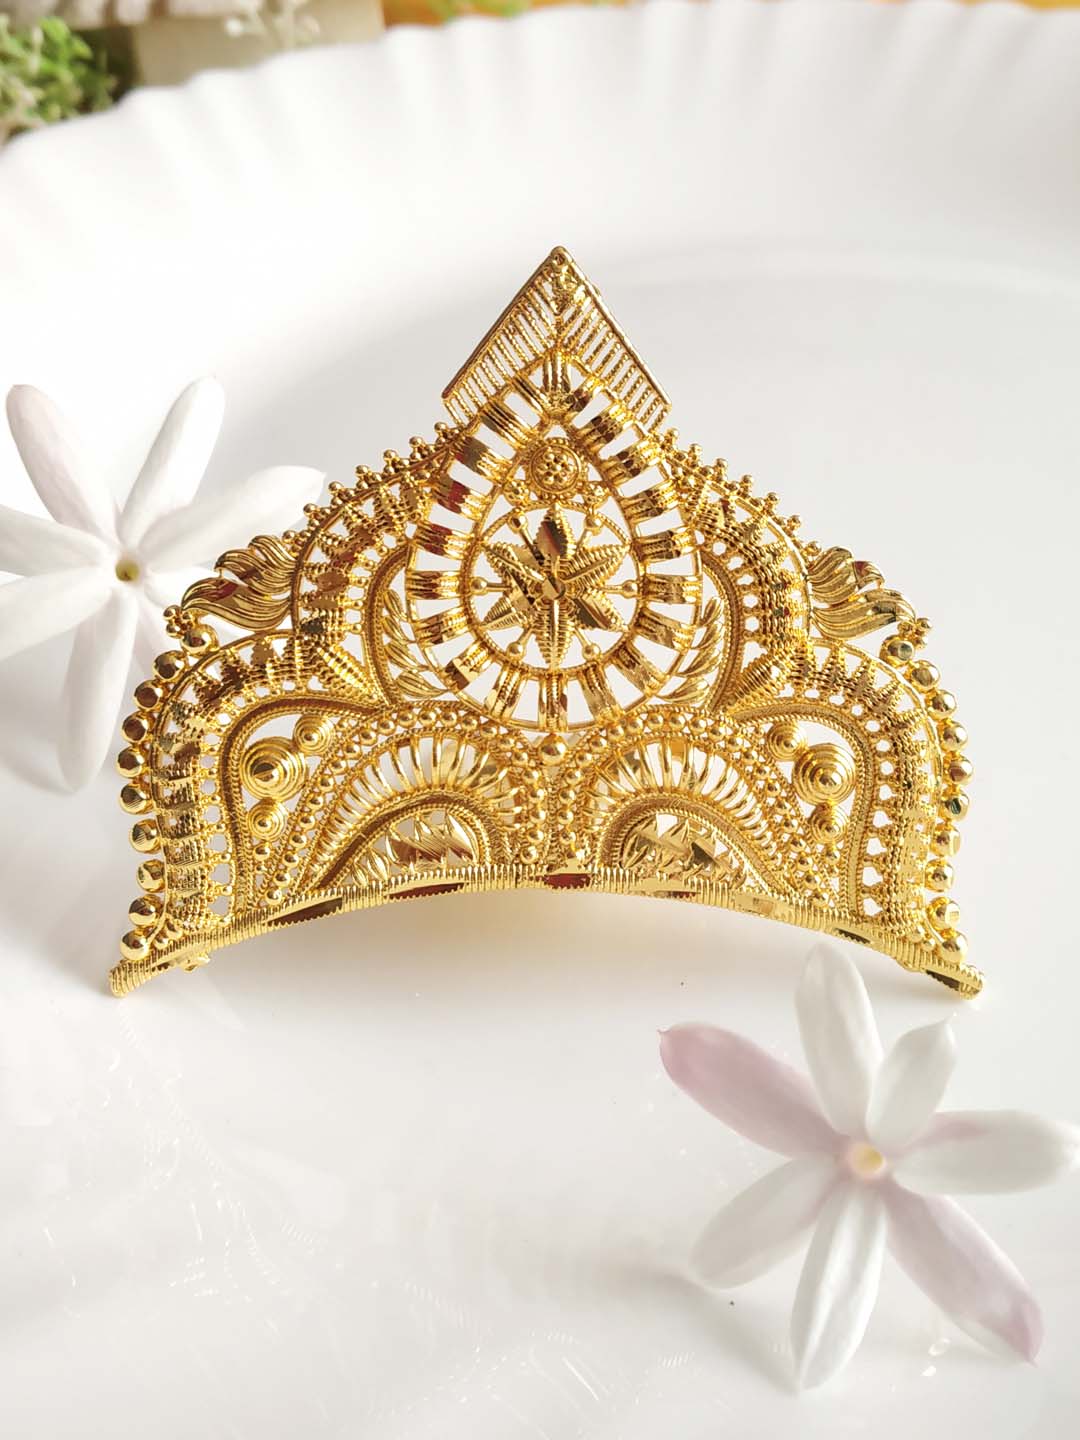 Gold Plated Tiara Crown For Bride